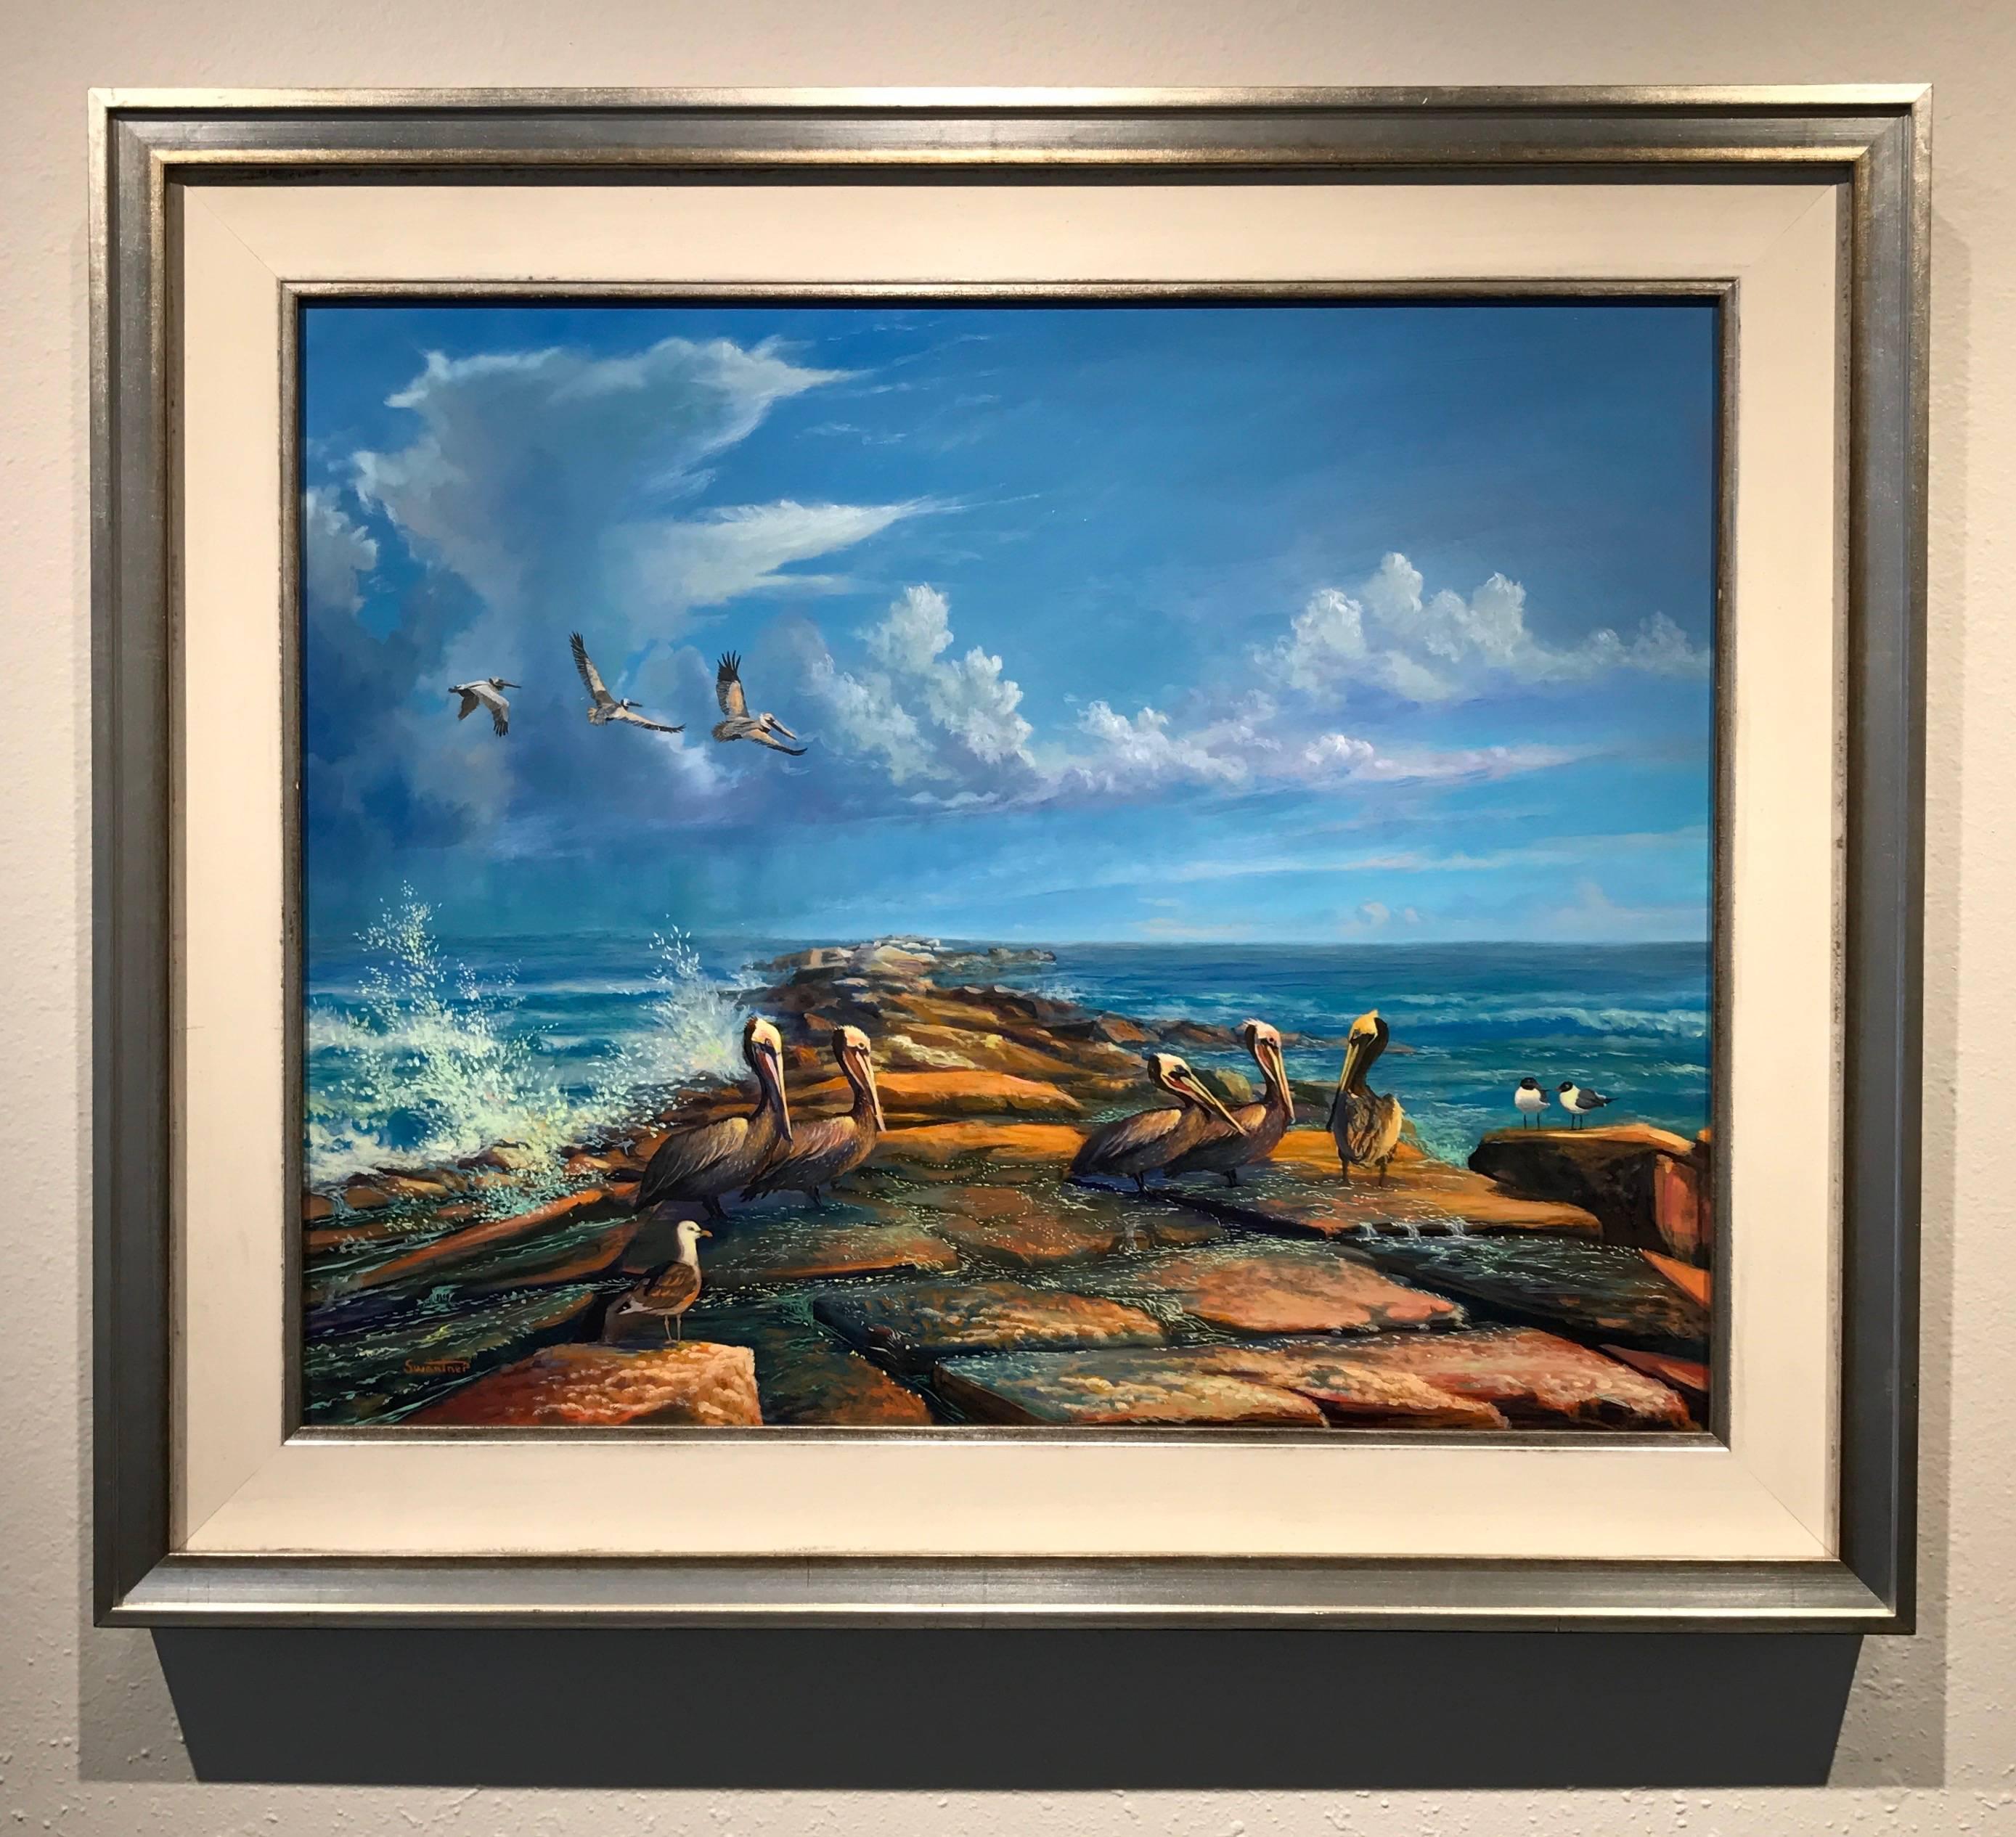 Pelicans on the Jetty - Painting by David Swantner